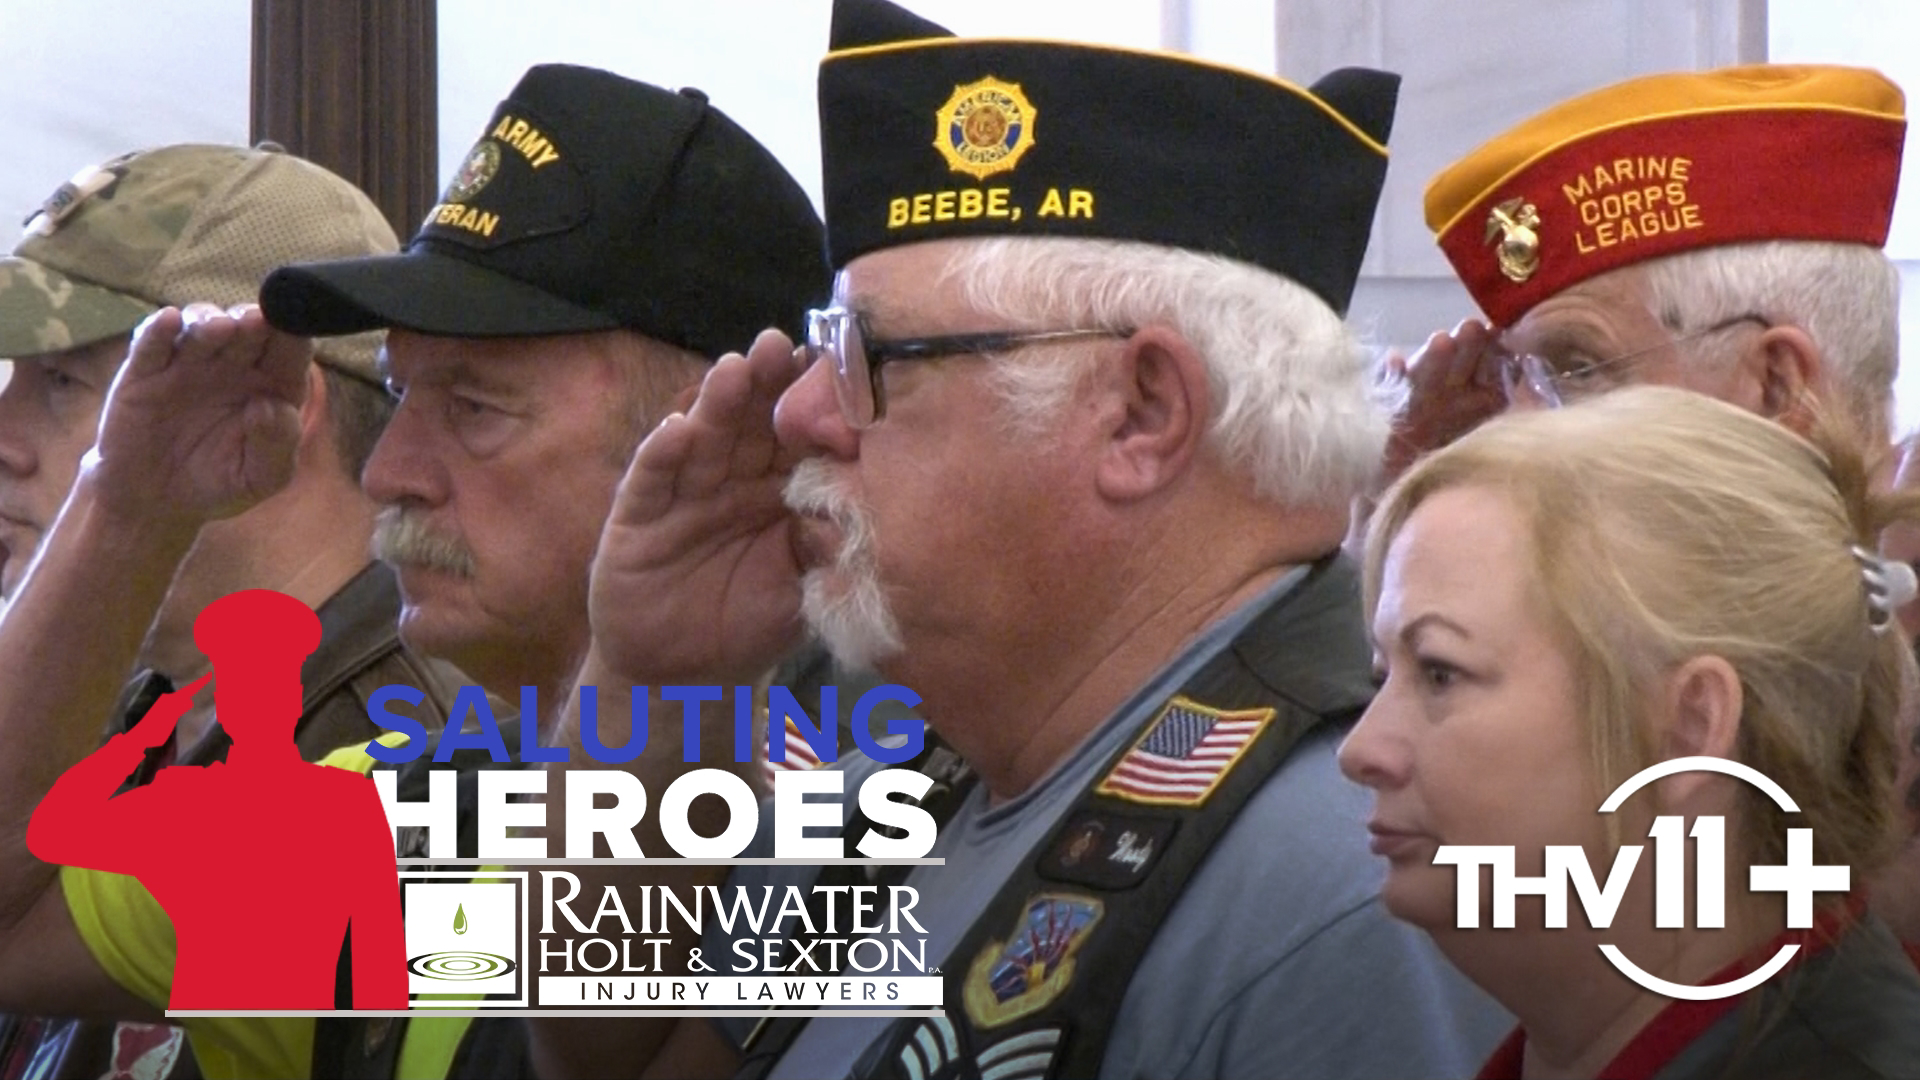 In this special, we profile the people and programs working to honor our military heroes and first responders in Arkansas.